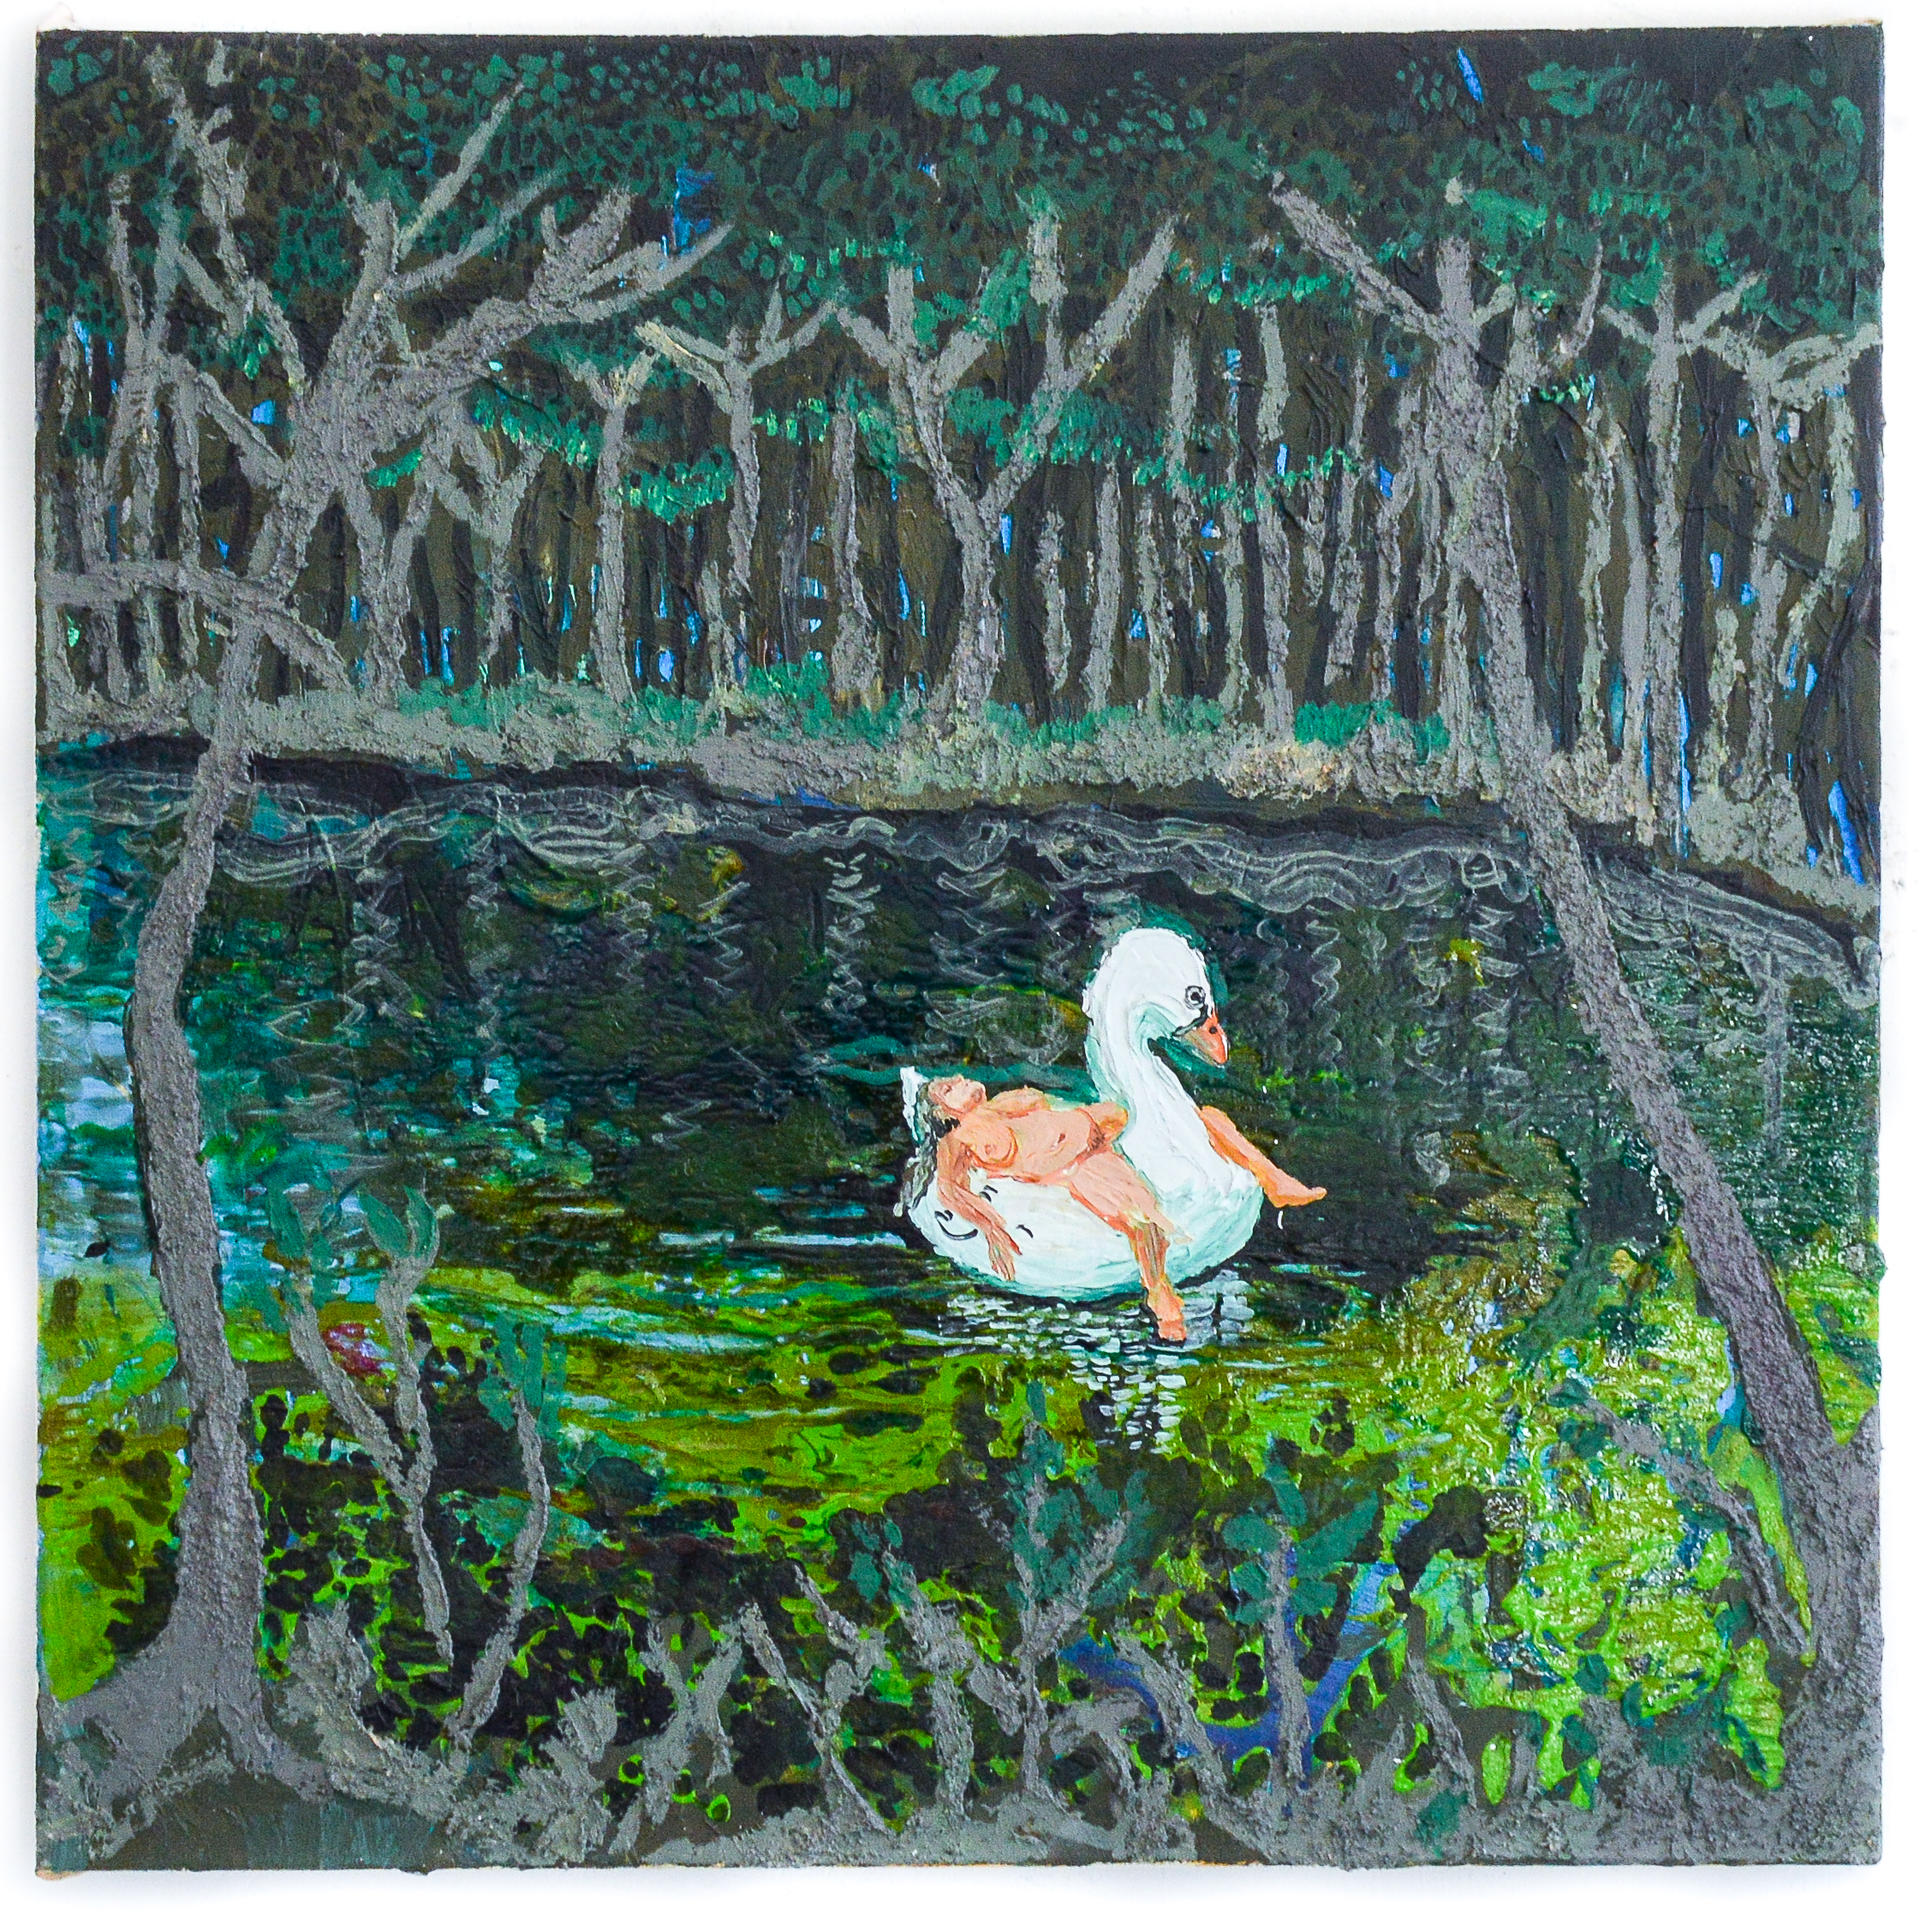 A painting of a woman floating on an inflatable swan in a pond